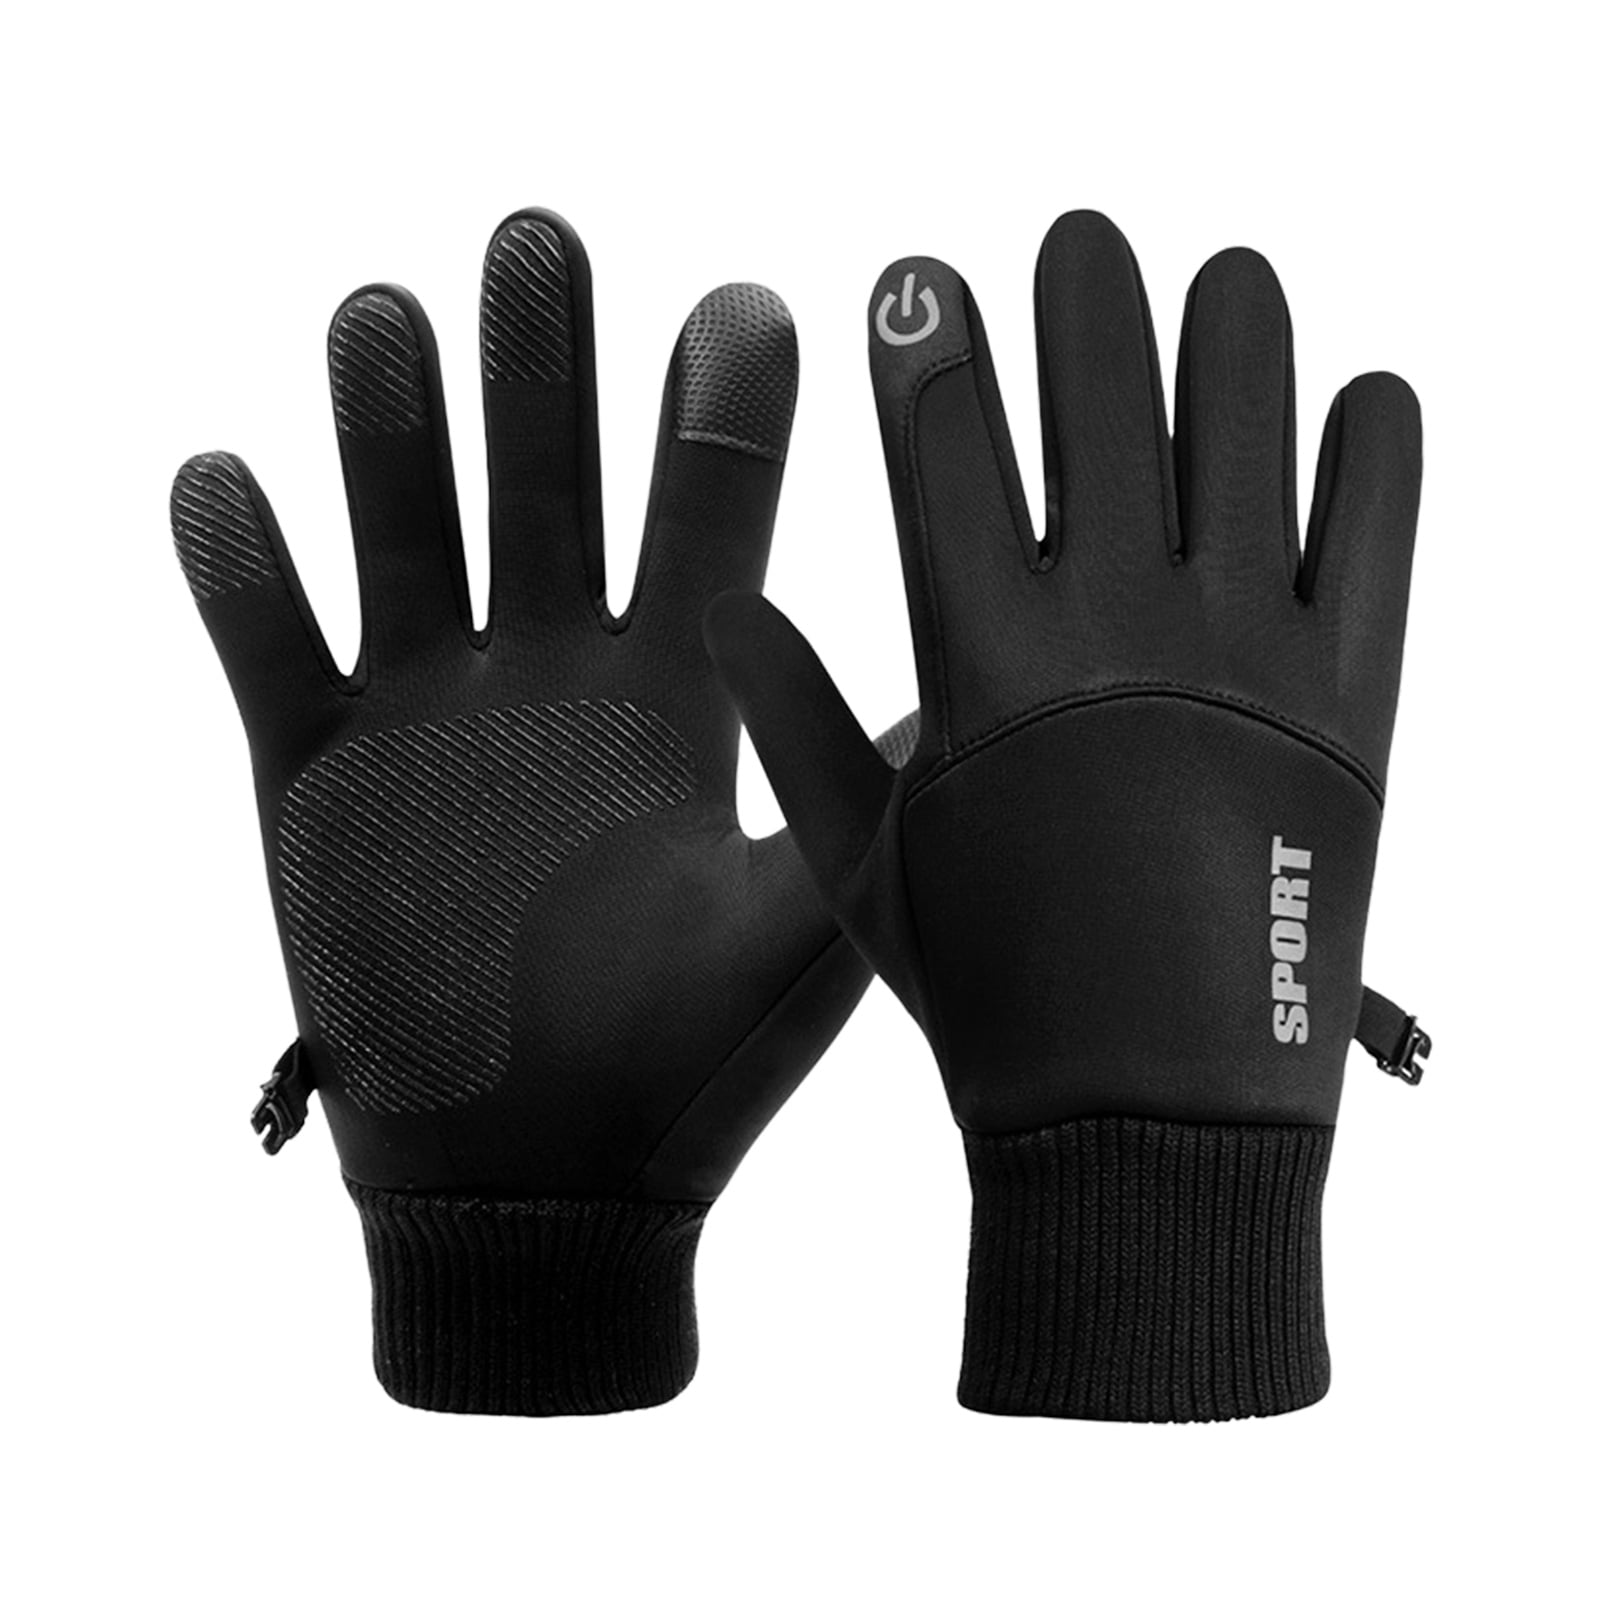 Winter Warm Windproof Waterproof Antislip Thermal Touch Screen Gloves Family Set 